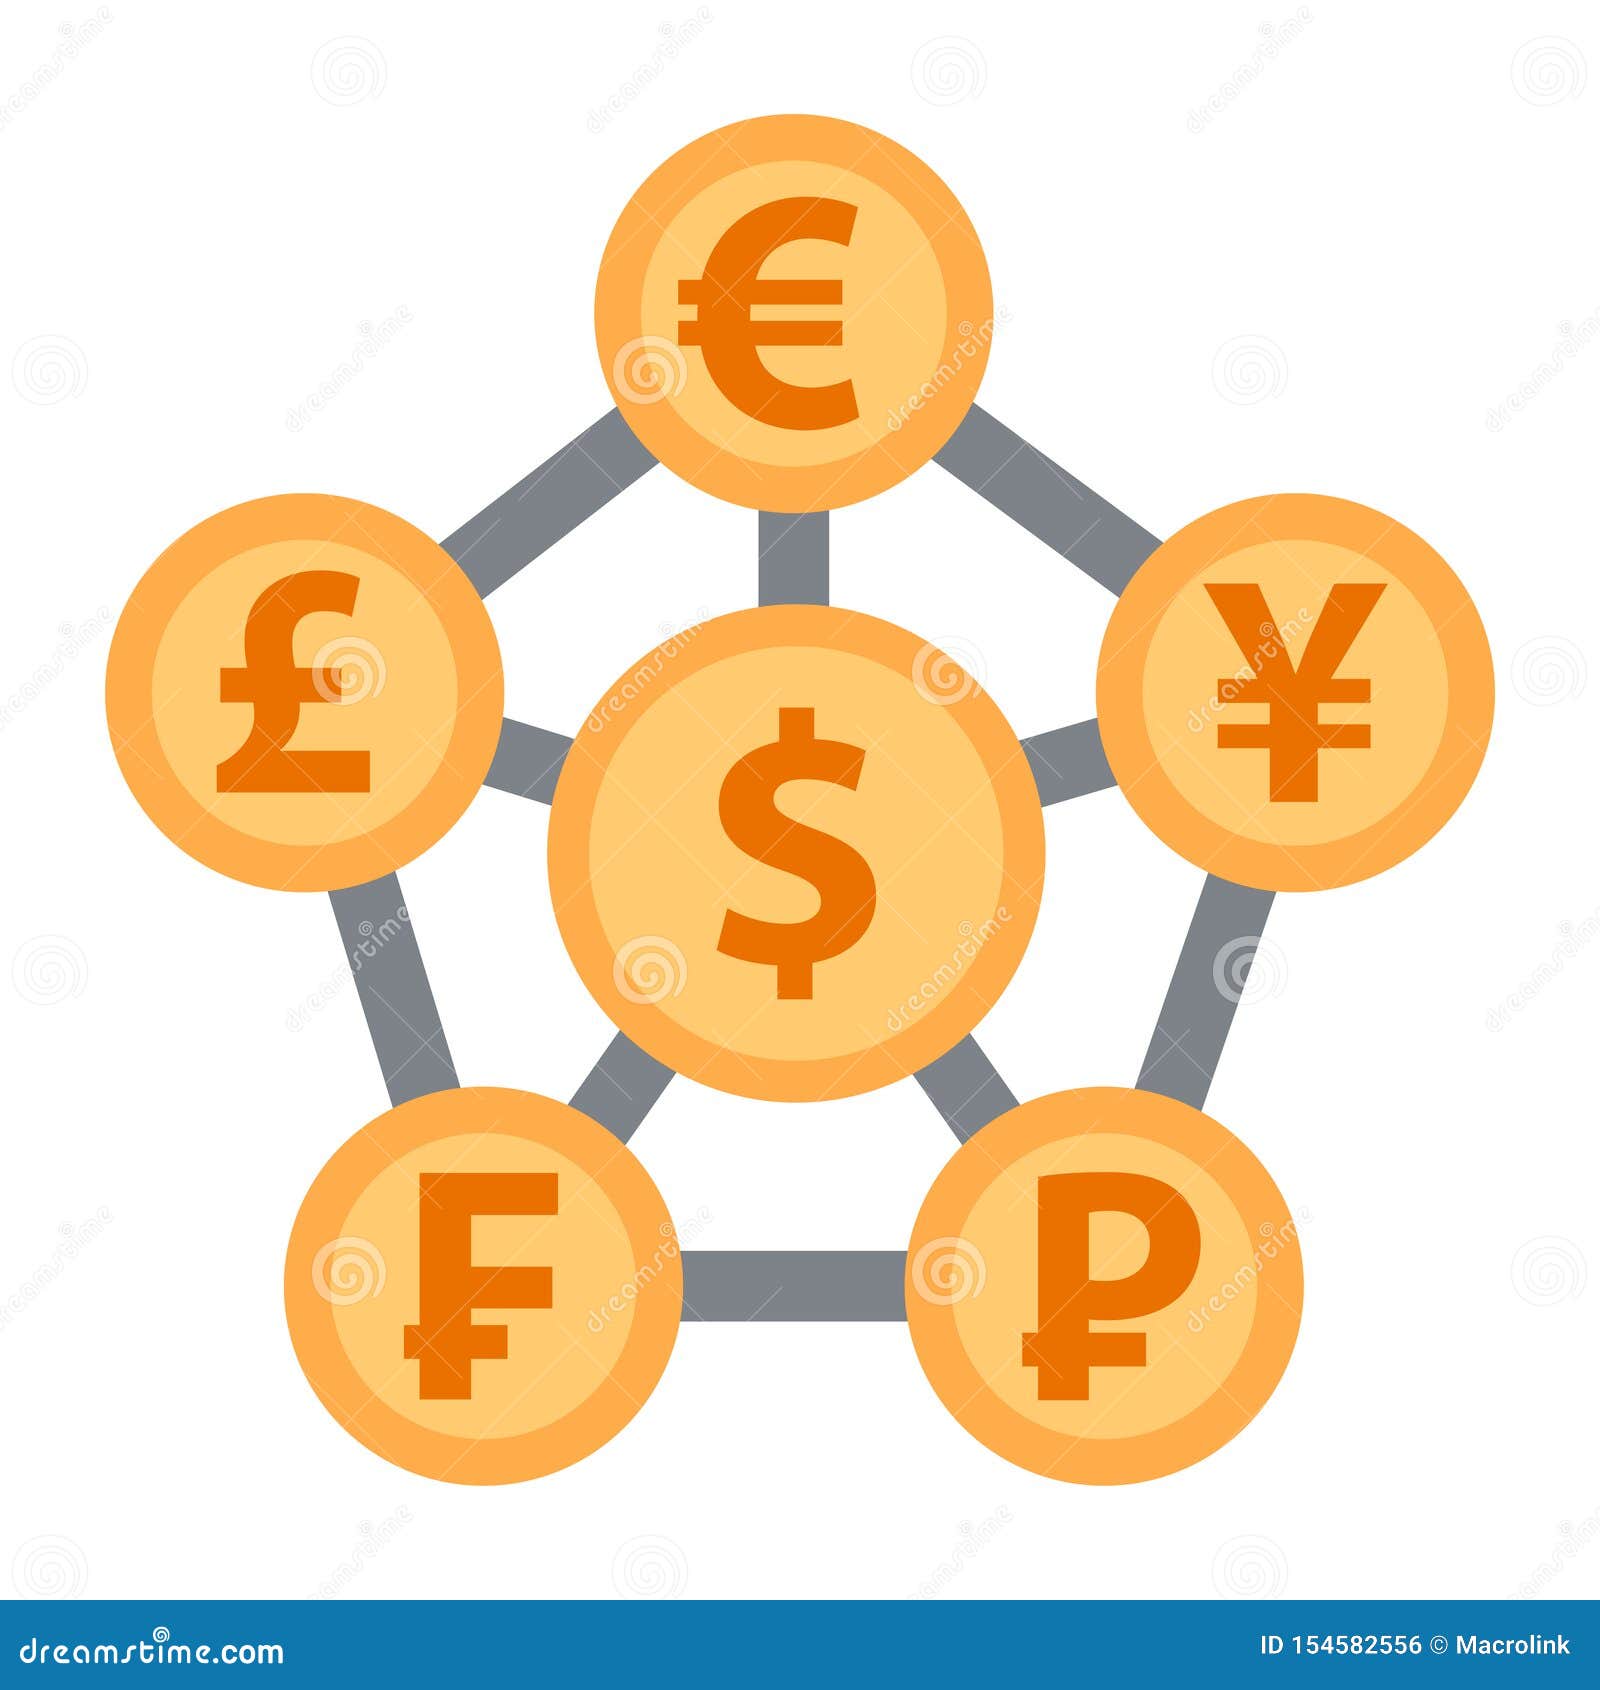 Vector Concept Illustration Of Exchange With Links Near ...